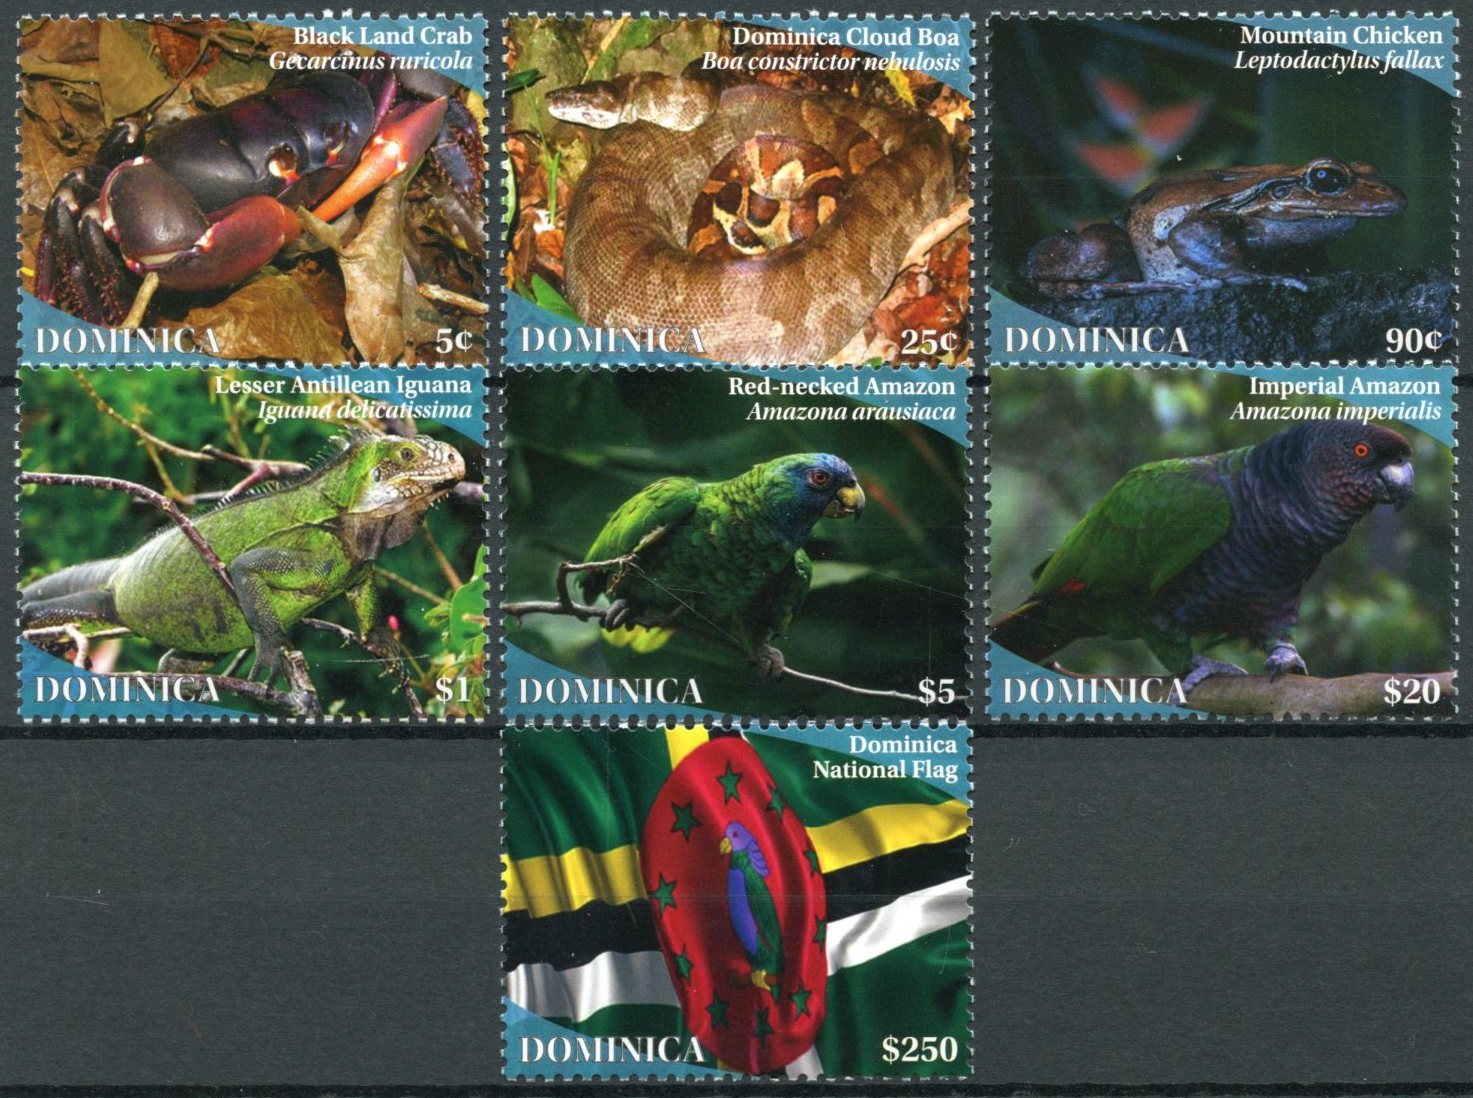 Dominica Birds on Stamps 2021 MNH Wildlife Parrots Crabs Snakes Frogs Flags Lizards 7v Set